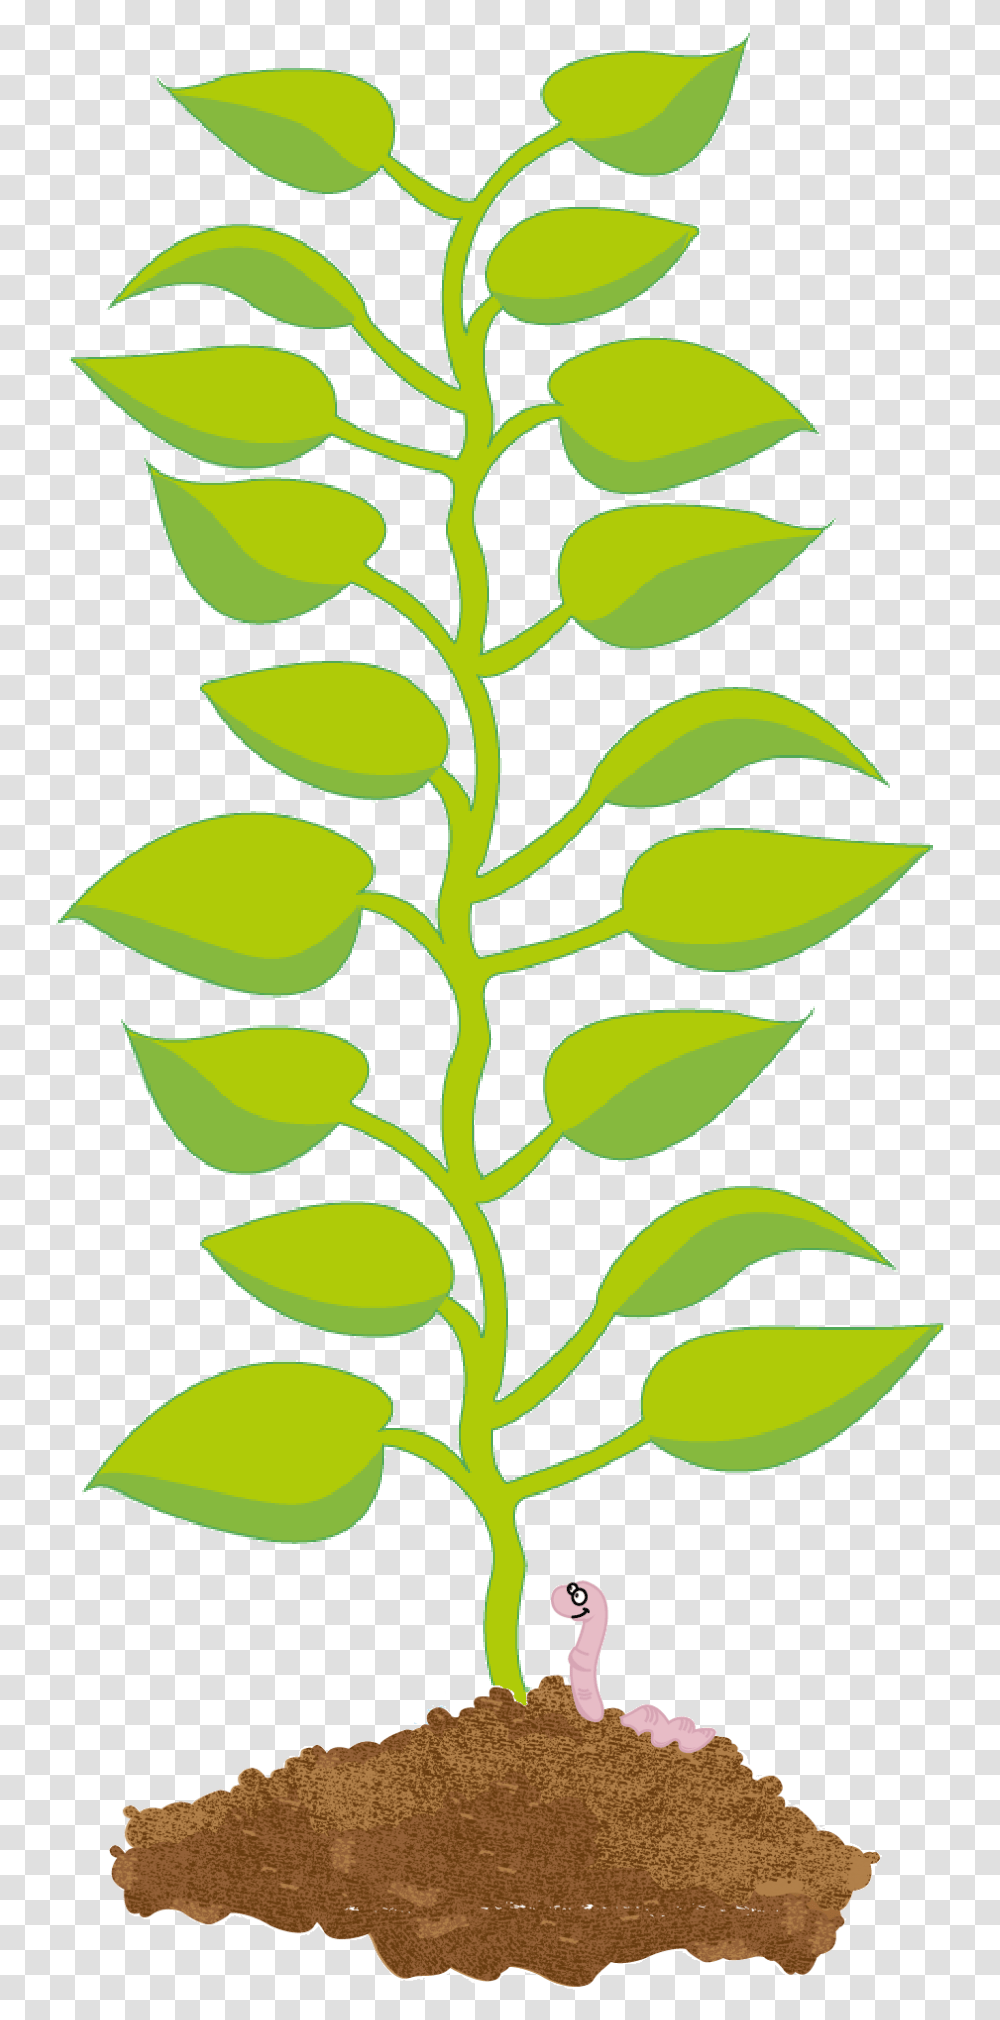 Illustration Of A Potato Plant S Leaves Growing From Clipart Potato Leaf, Green, Jar, Vase, Pottery Transparent Png